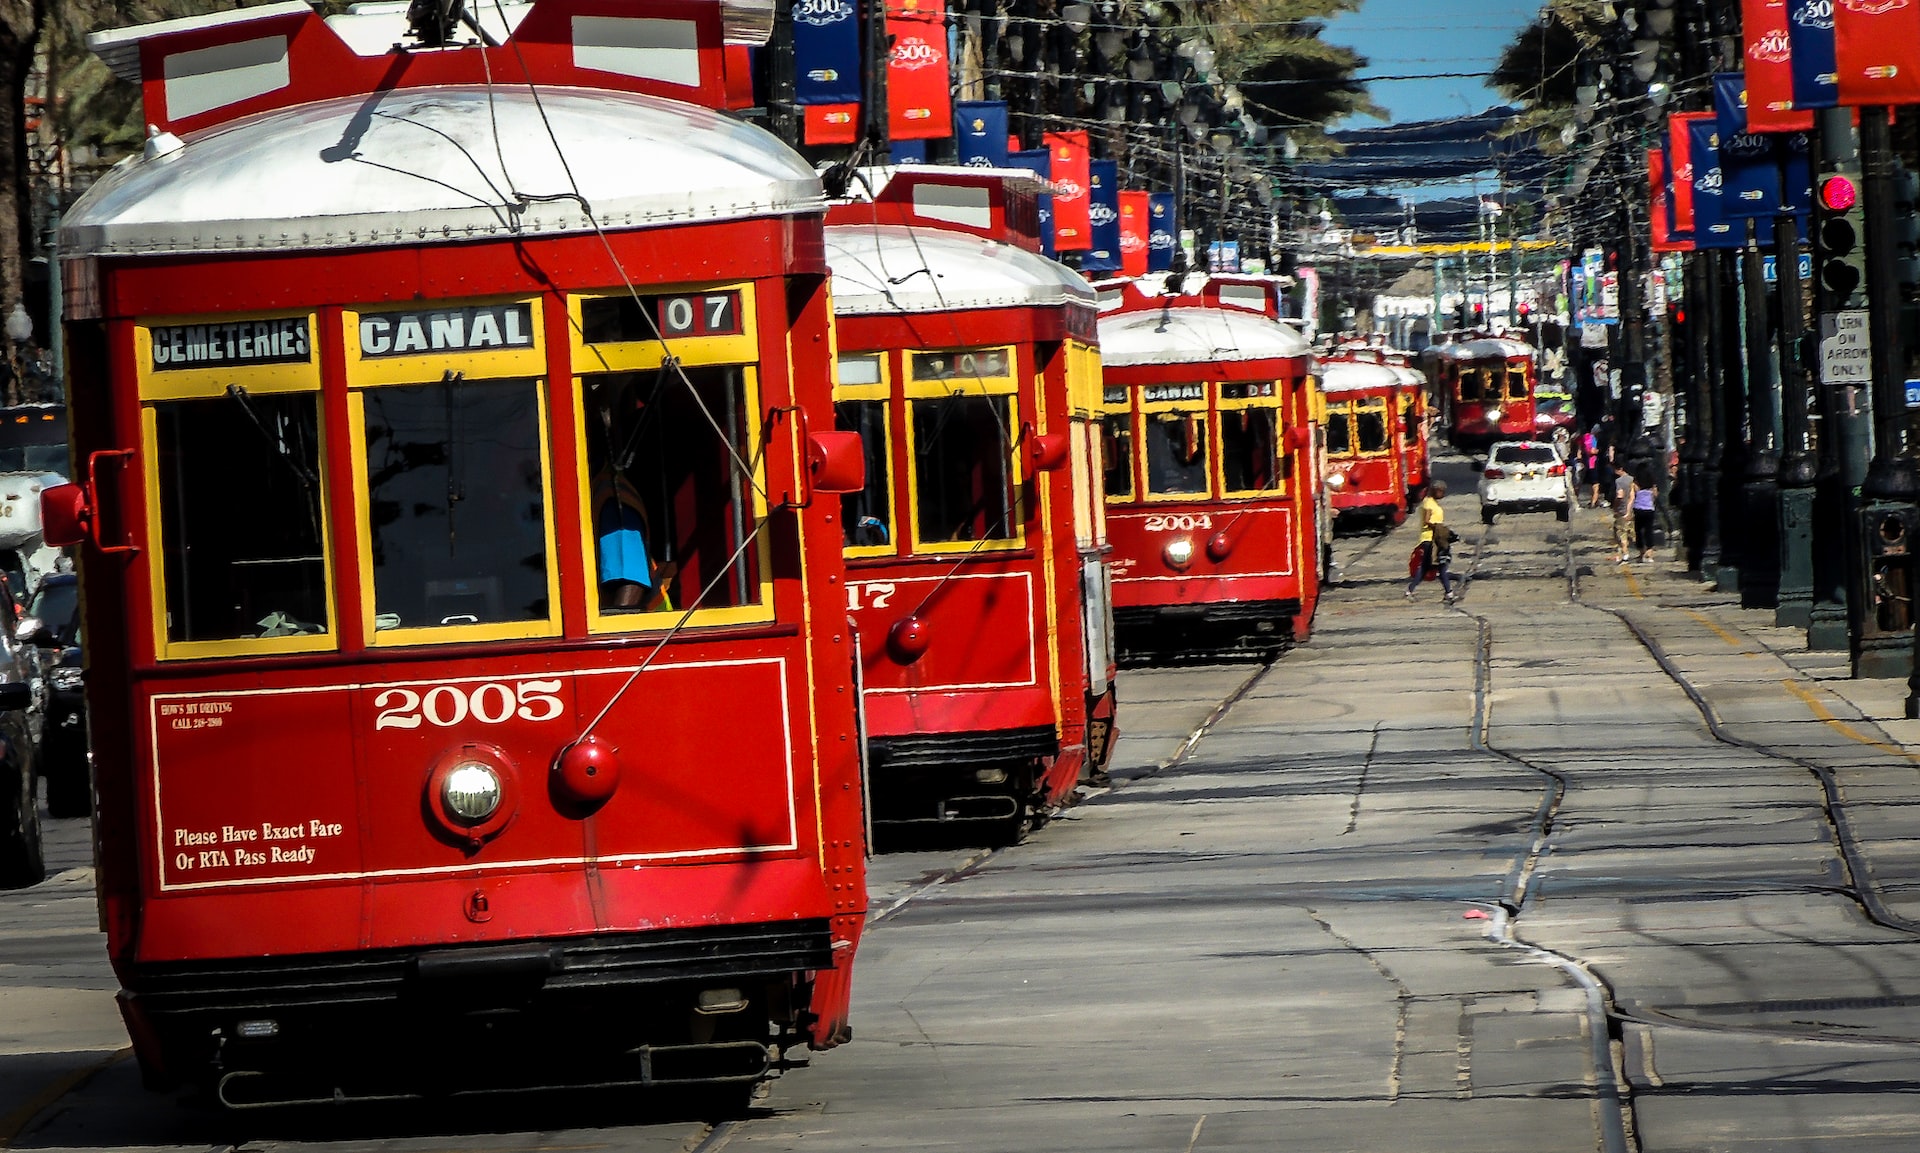 A line of bright red Canal streetcars going down the street.